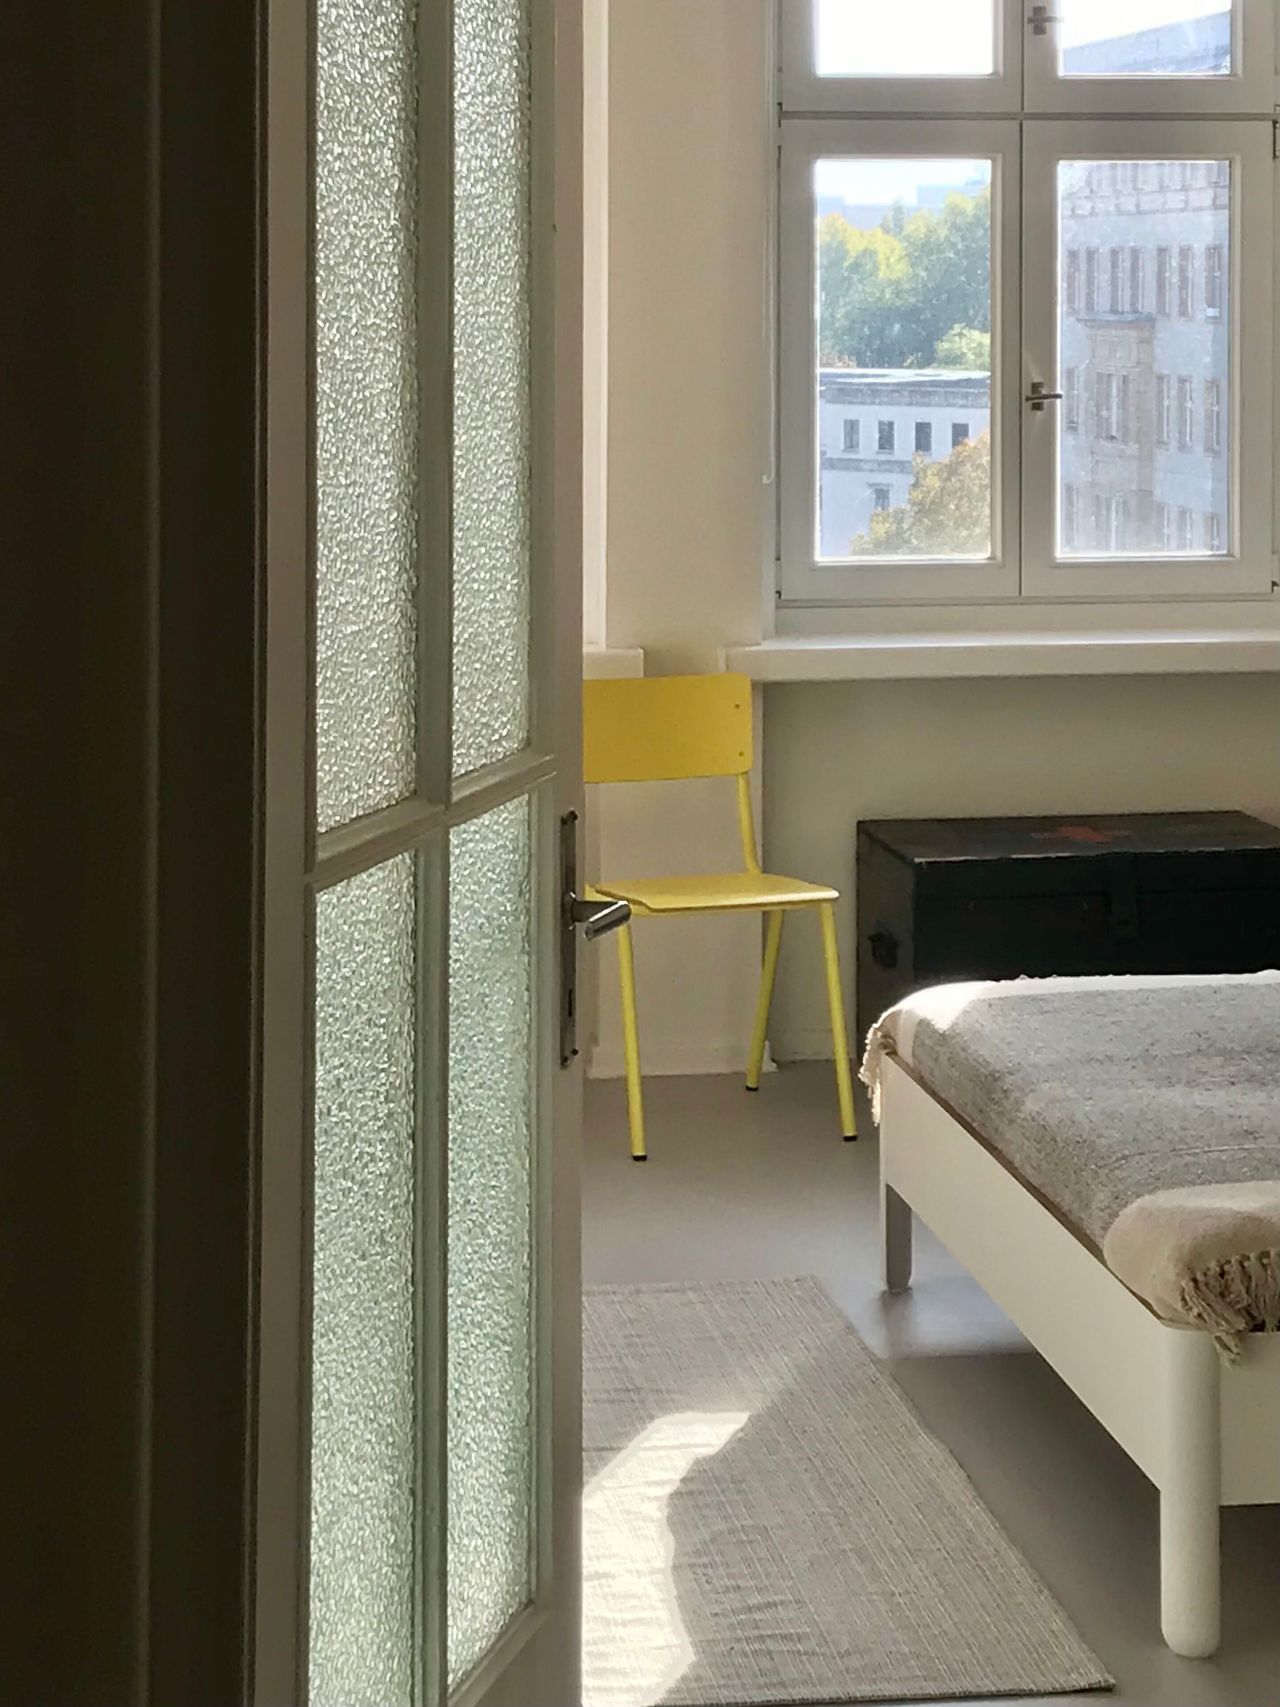 One of its kind studio-style apartment (102 sqm) in historic, fully renovated building in best area of Friedrichshain-Mitte